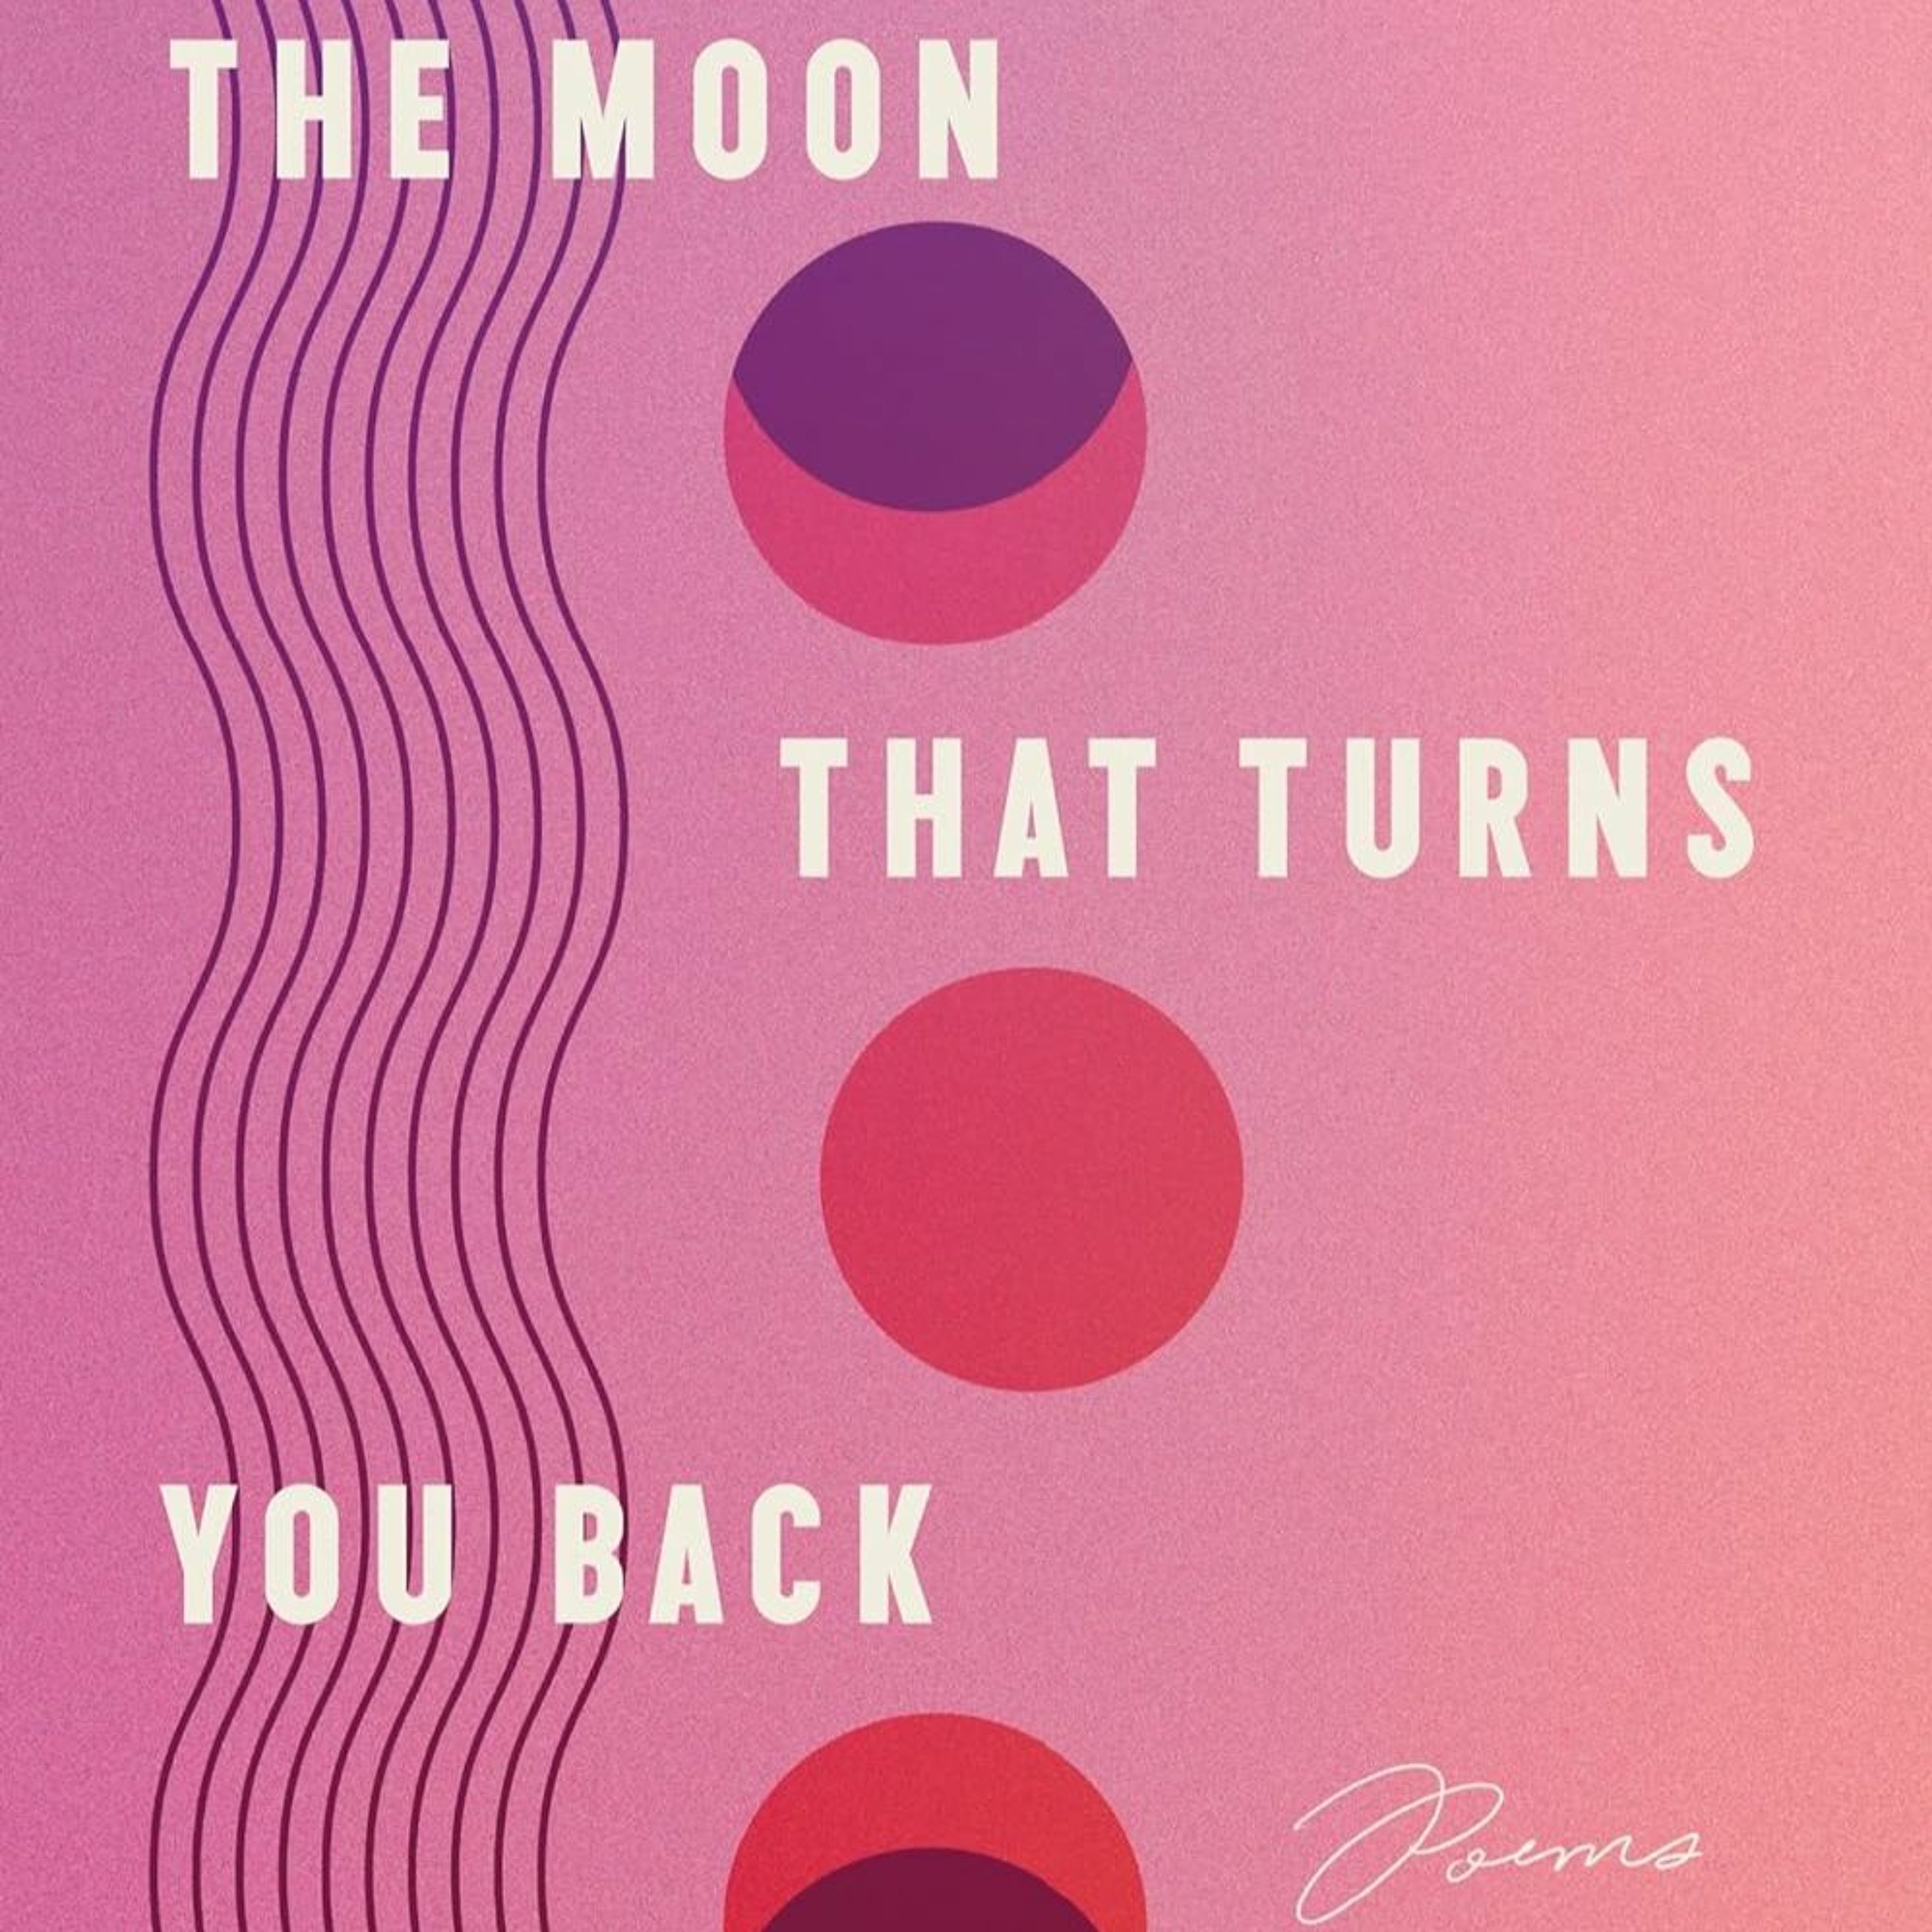 The Moon That Turns You Back by Hala Alyan